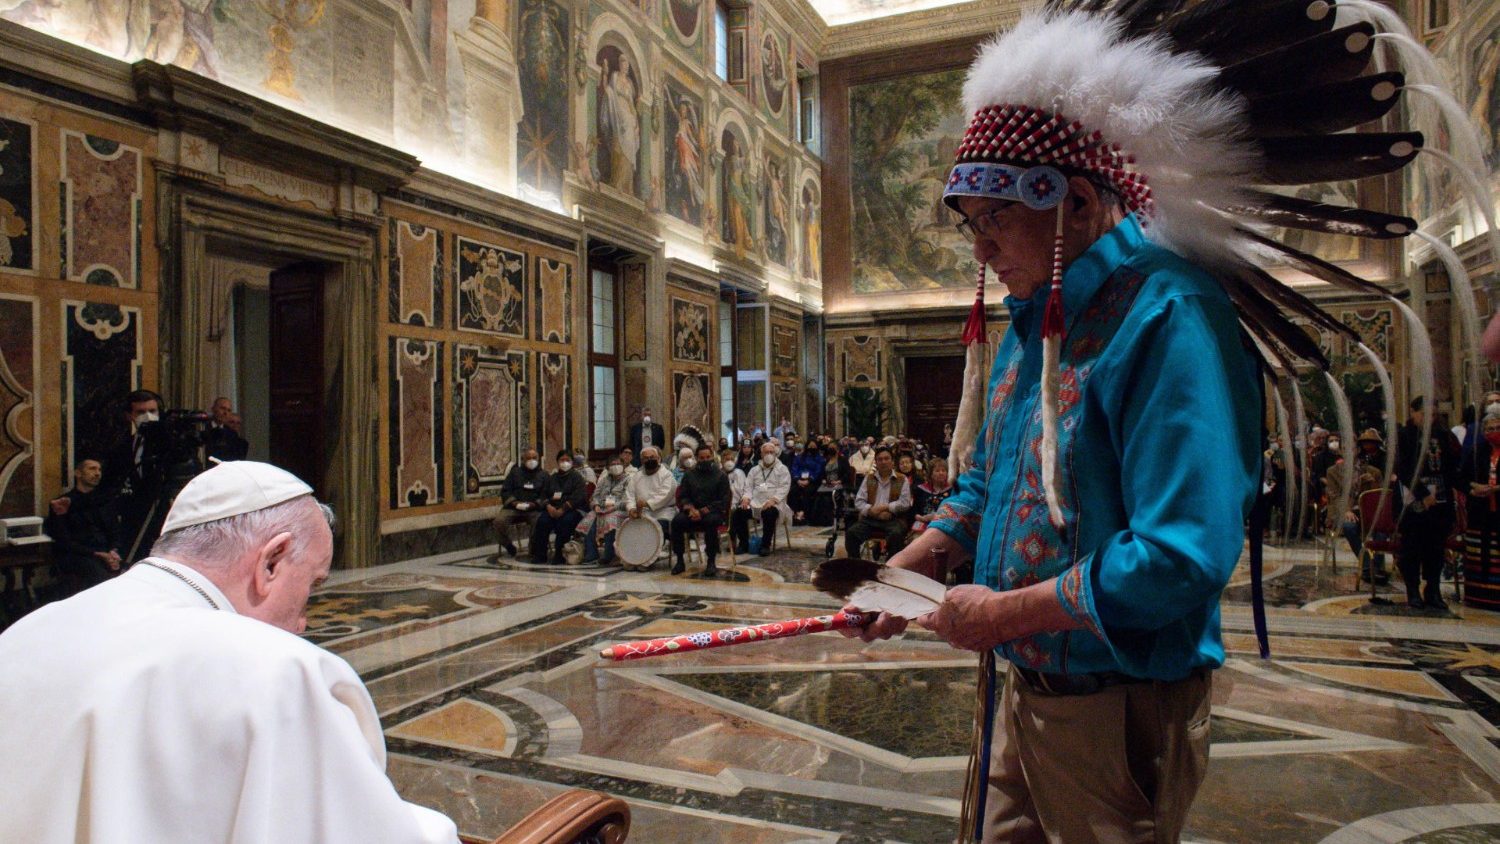 In Canada, the pope announced his itinerary: the warmth of the aboriginal people